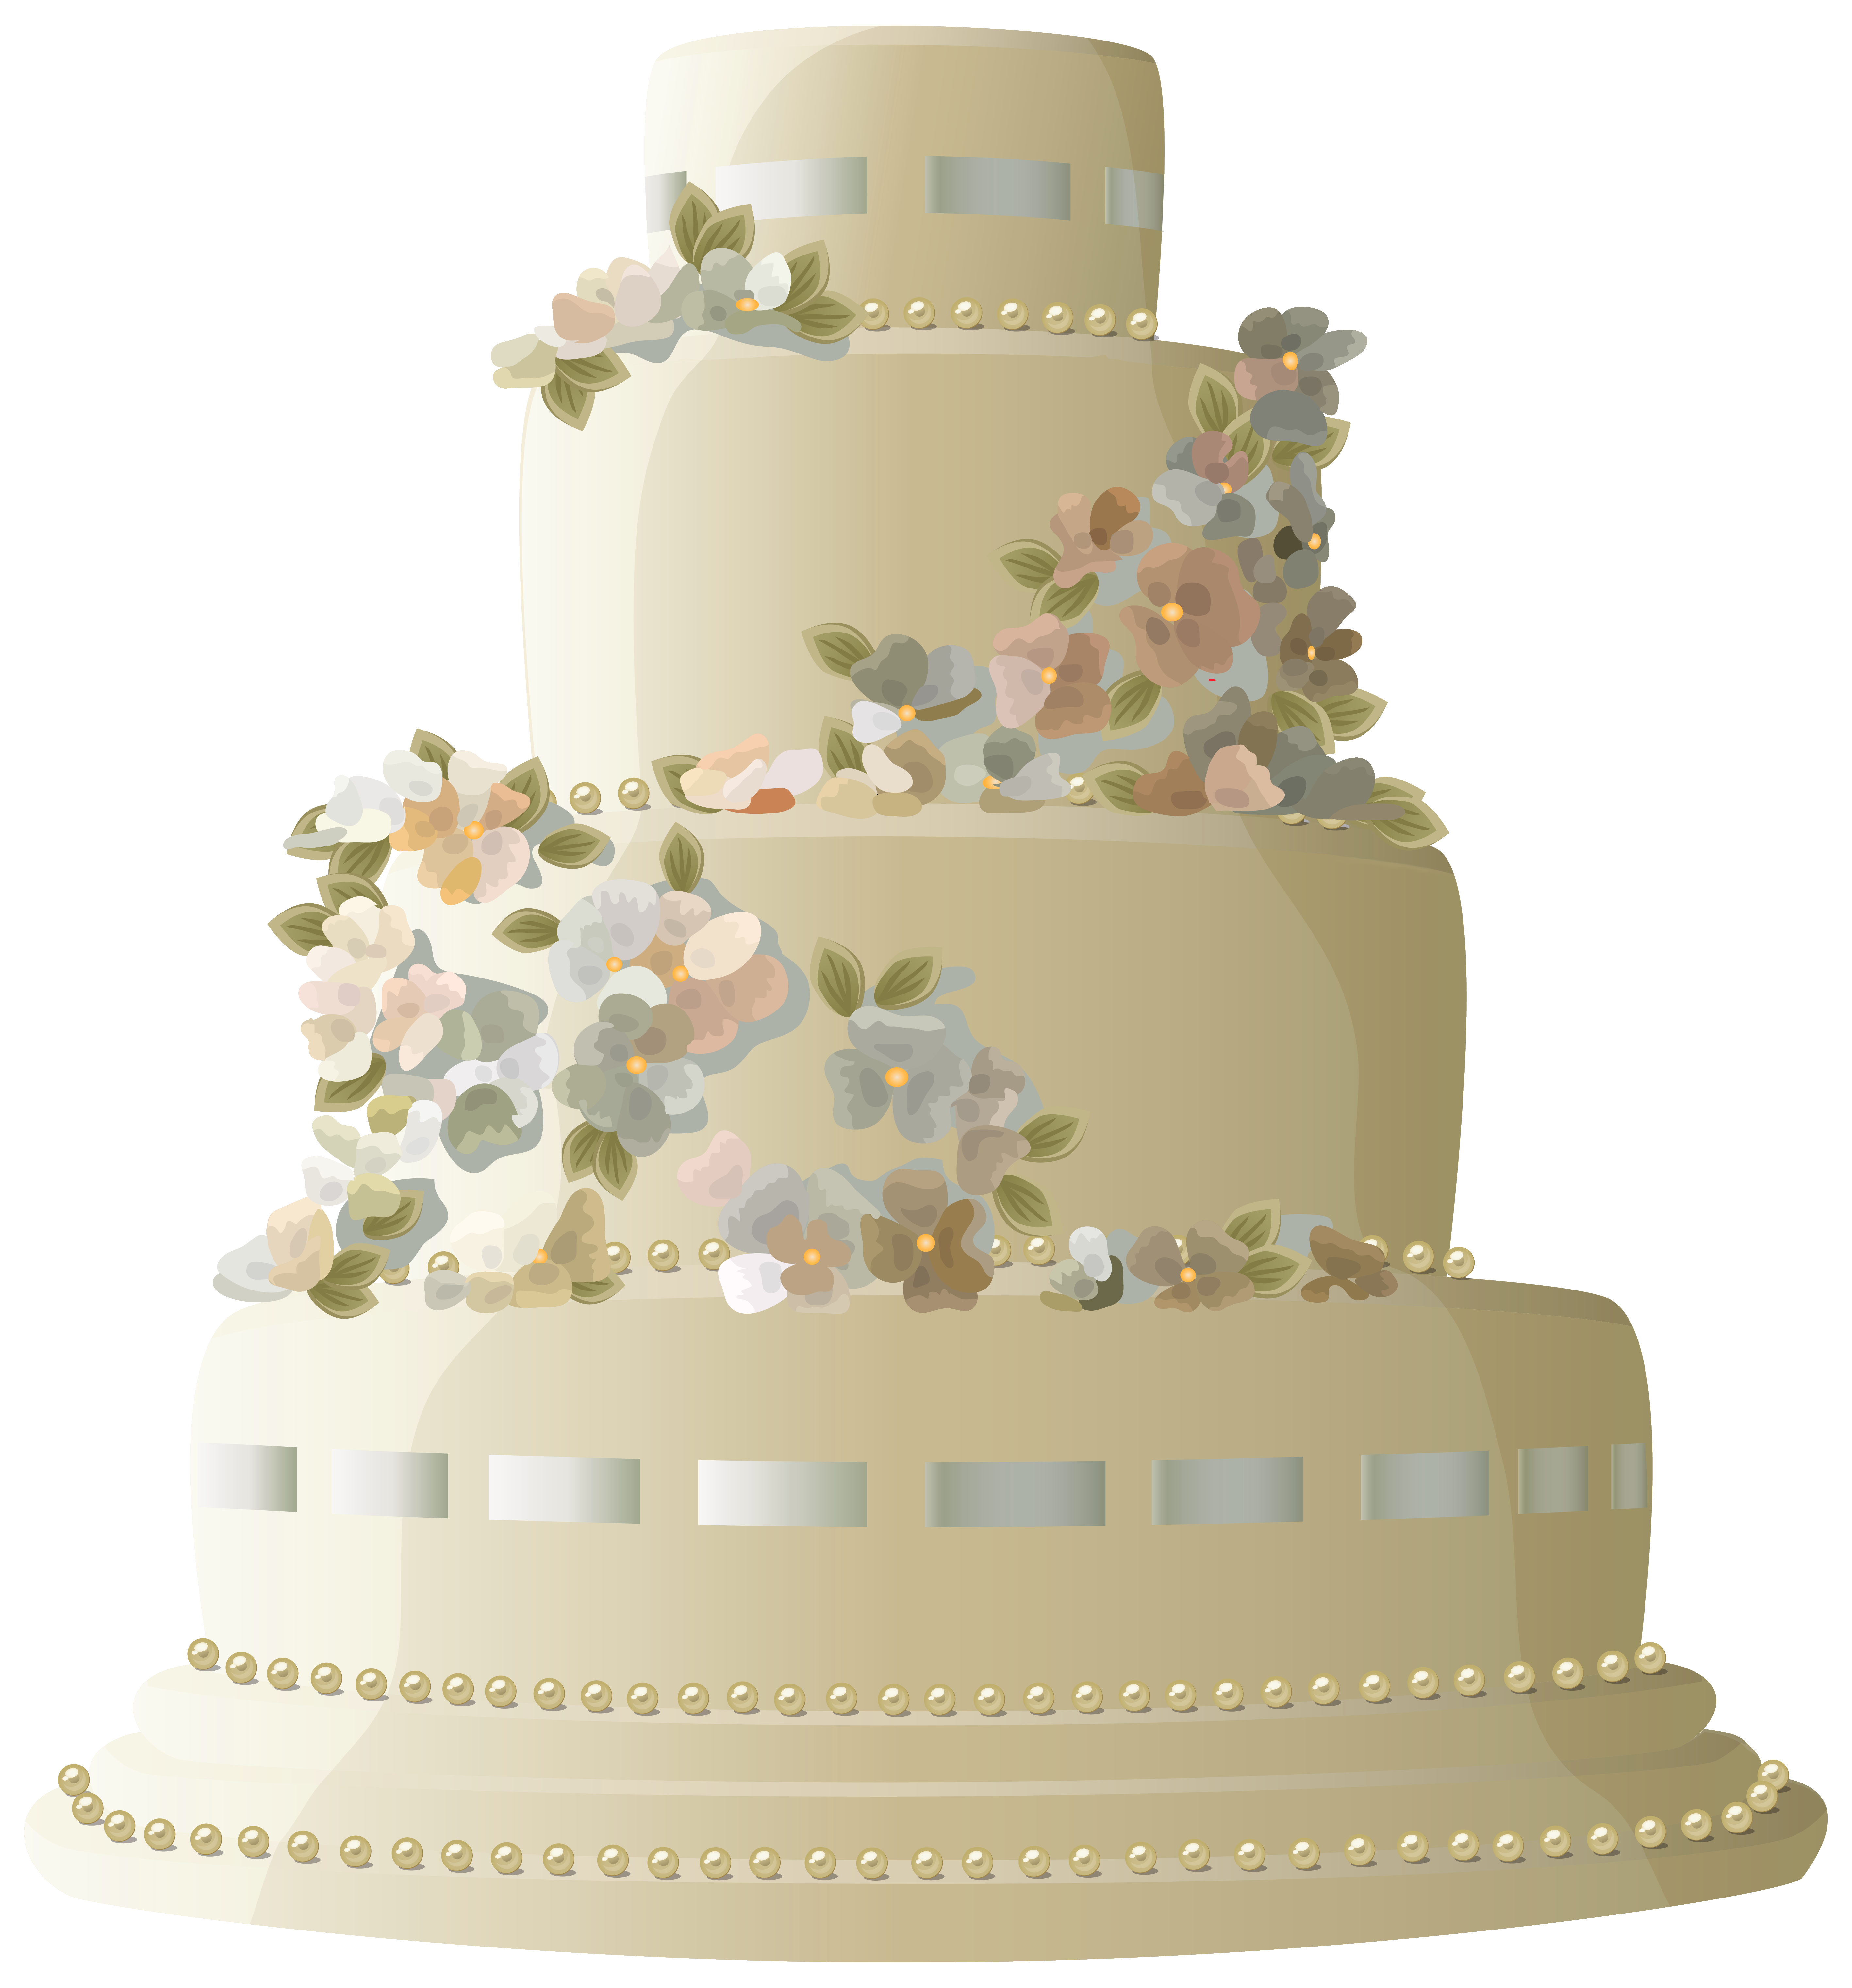 wedding cake png clipar image gallery yopriceville high quality images and transparent png free clipart gallery yopriceville